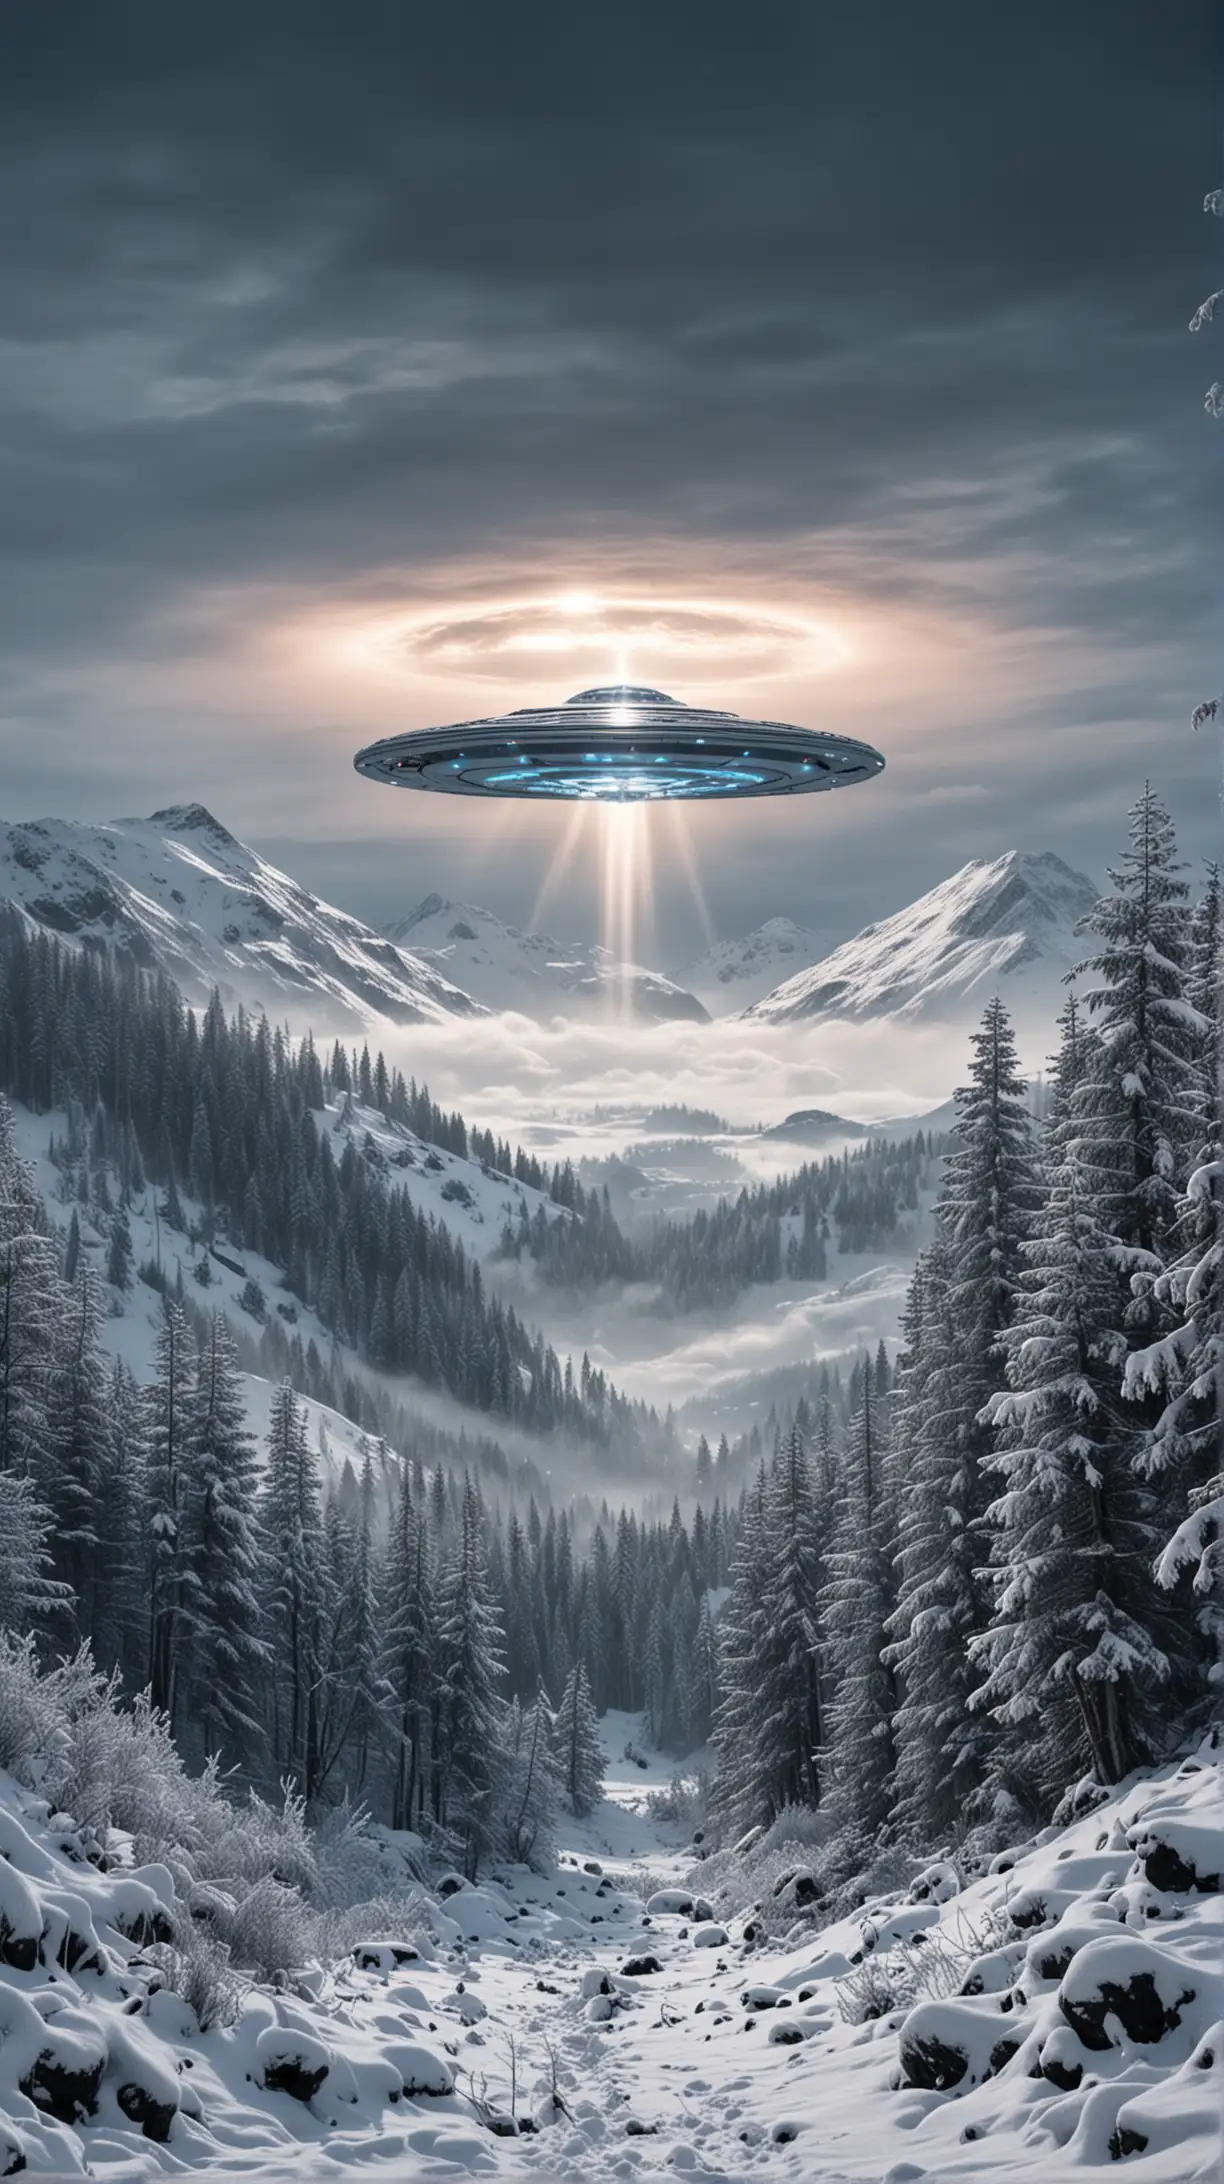 UFO in the mountains in winter